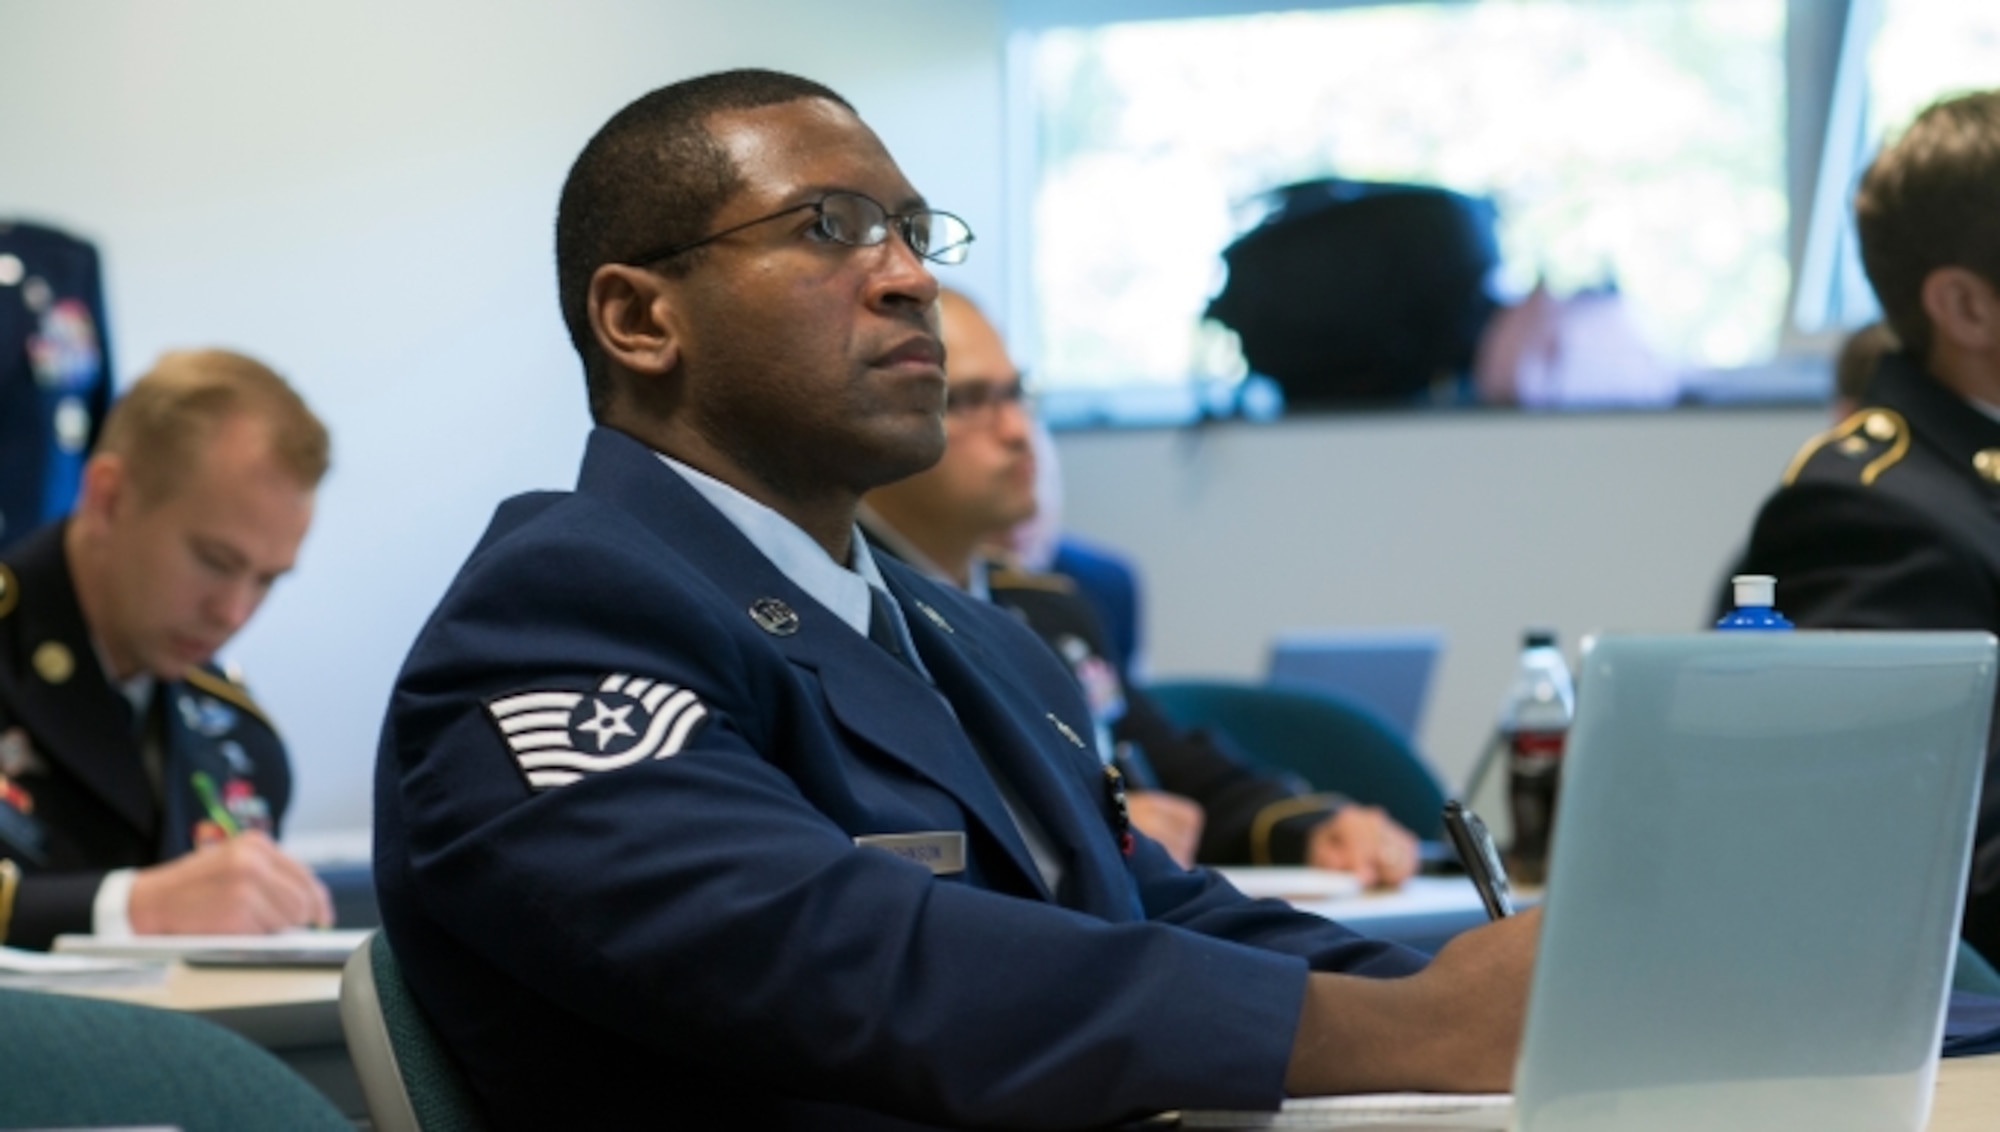 Tech. Sgt. Kenneth Johnson attends class at George Mason as part of the Enlisted to Medical Degree Preparatory Program. The Enlisted to Medical Degree Preparatory Program is a partnership between the Armed Services and Uniformed Services University. Designed for enlisted service members, the two-year program enables members to remain on active duty status while enrolled as full-time students in preparation for application to medical school. (Courtesy photo)